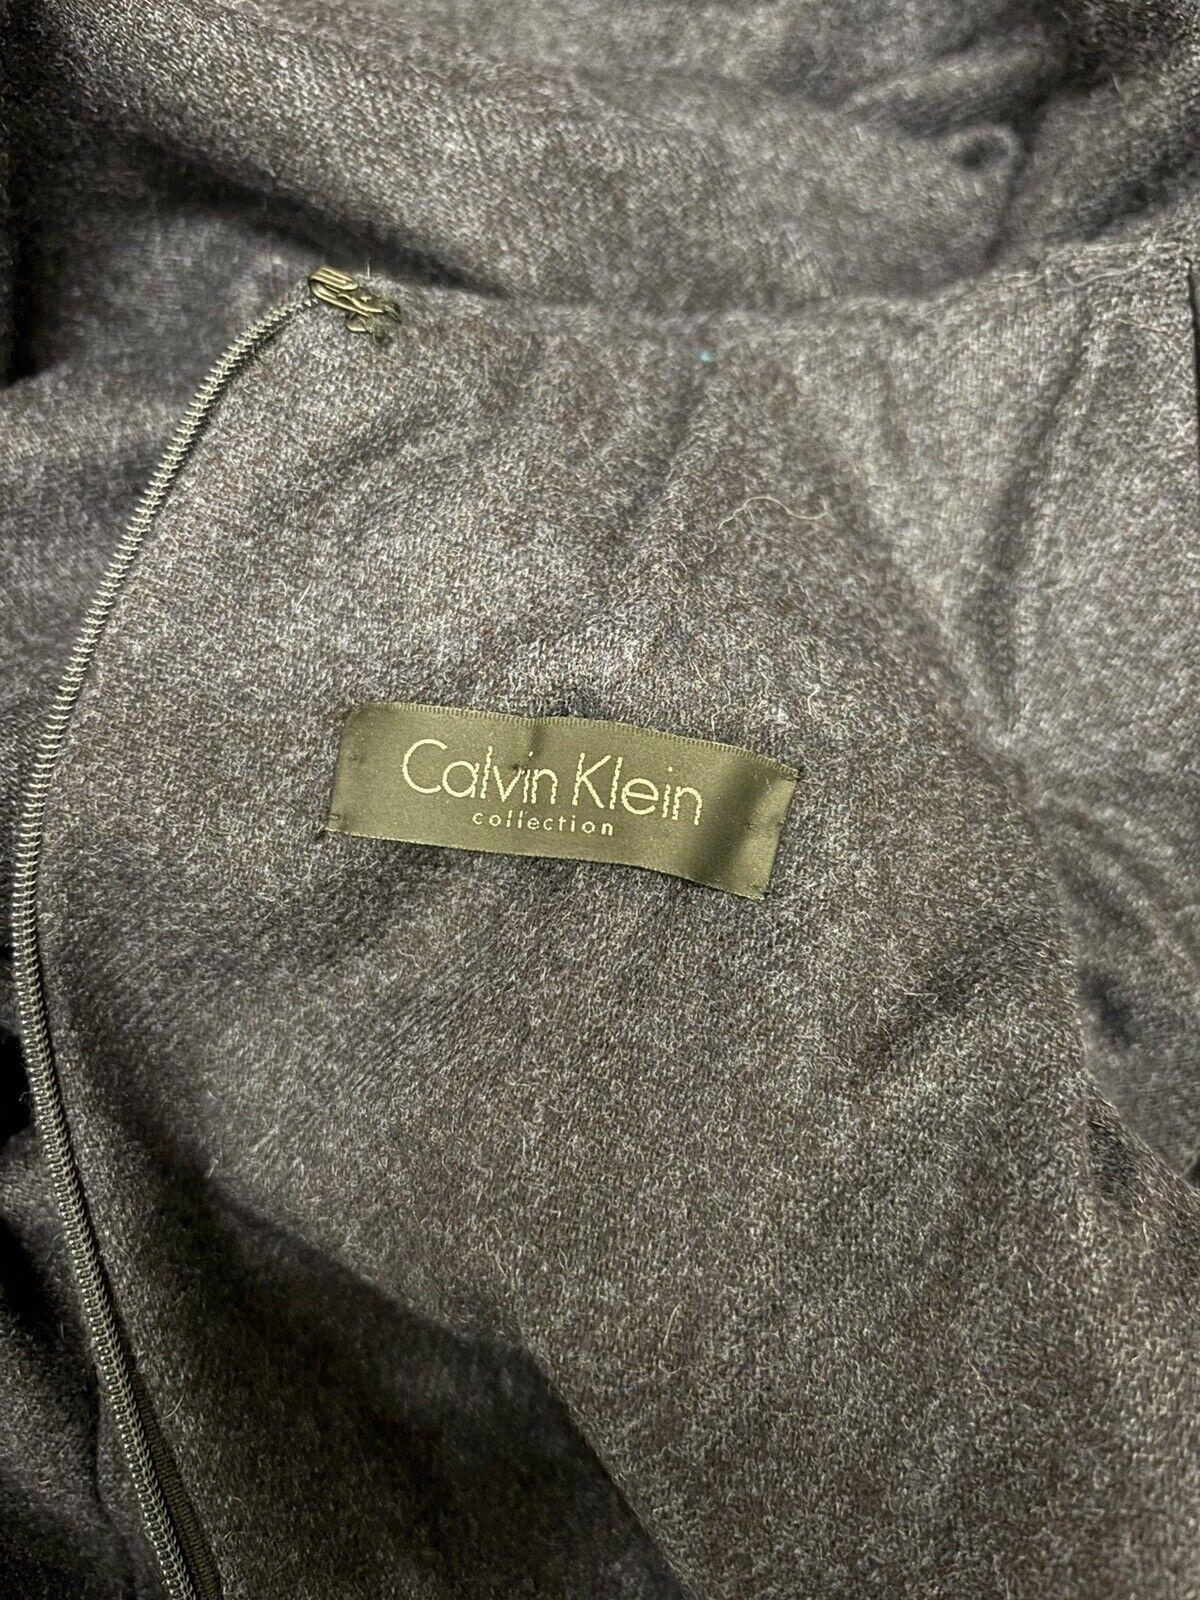 CALVIN KLEIN COLLECTION 2007 vintage runway evening gown maxi dress In Excellent Condition For Sale In Leonardo, NJ